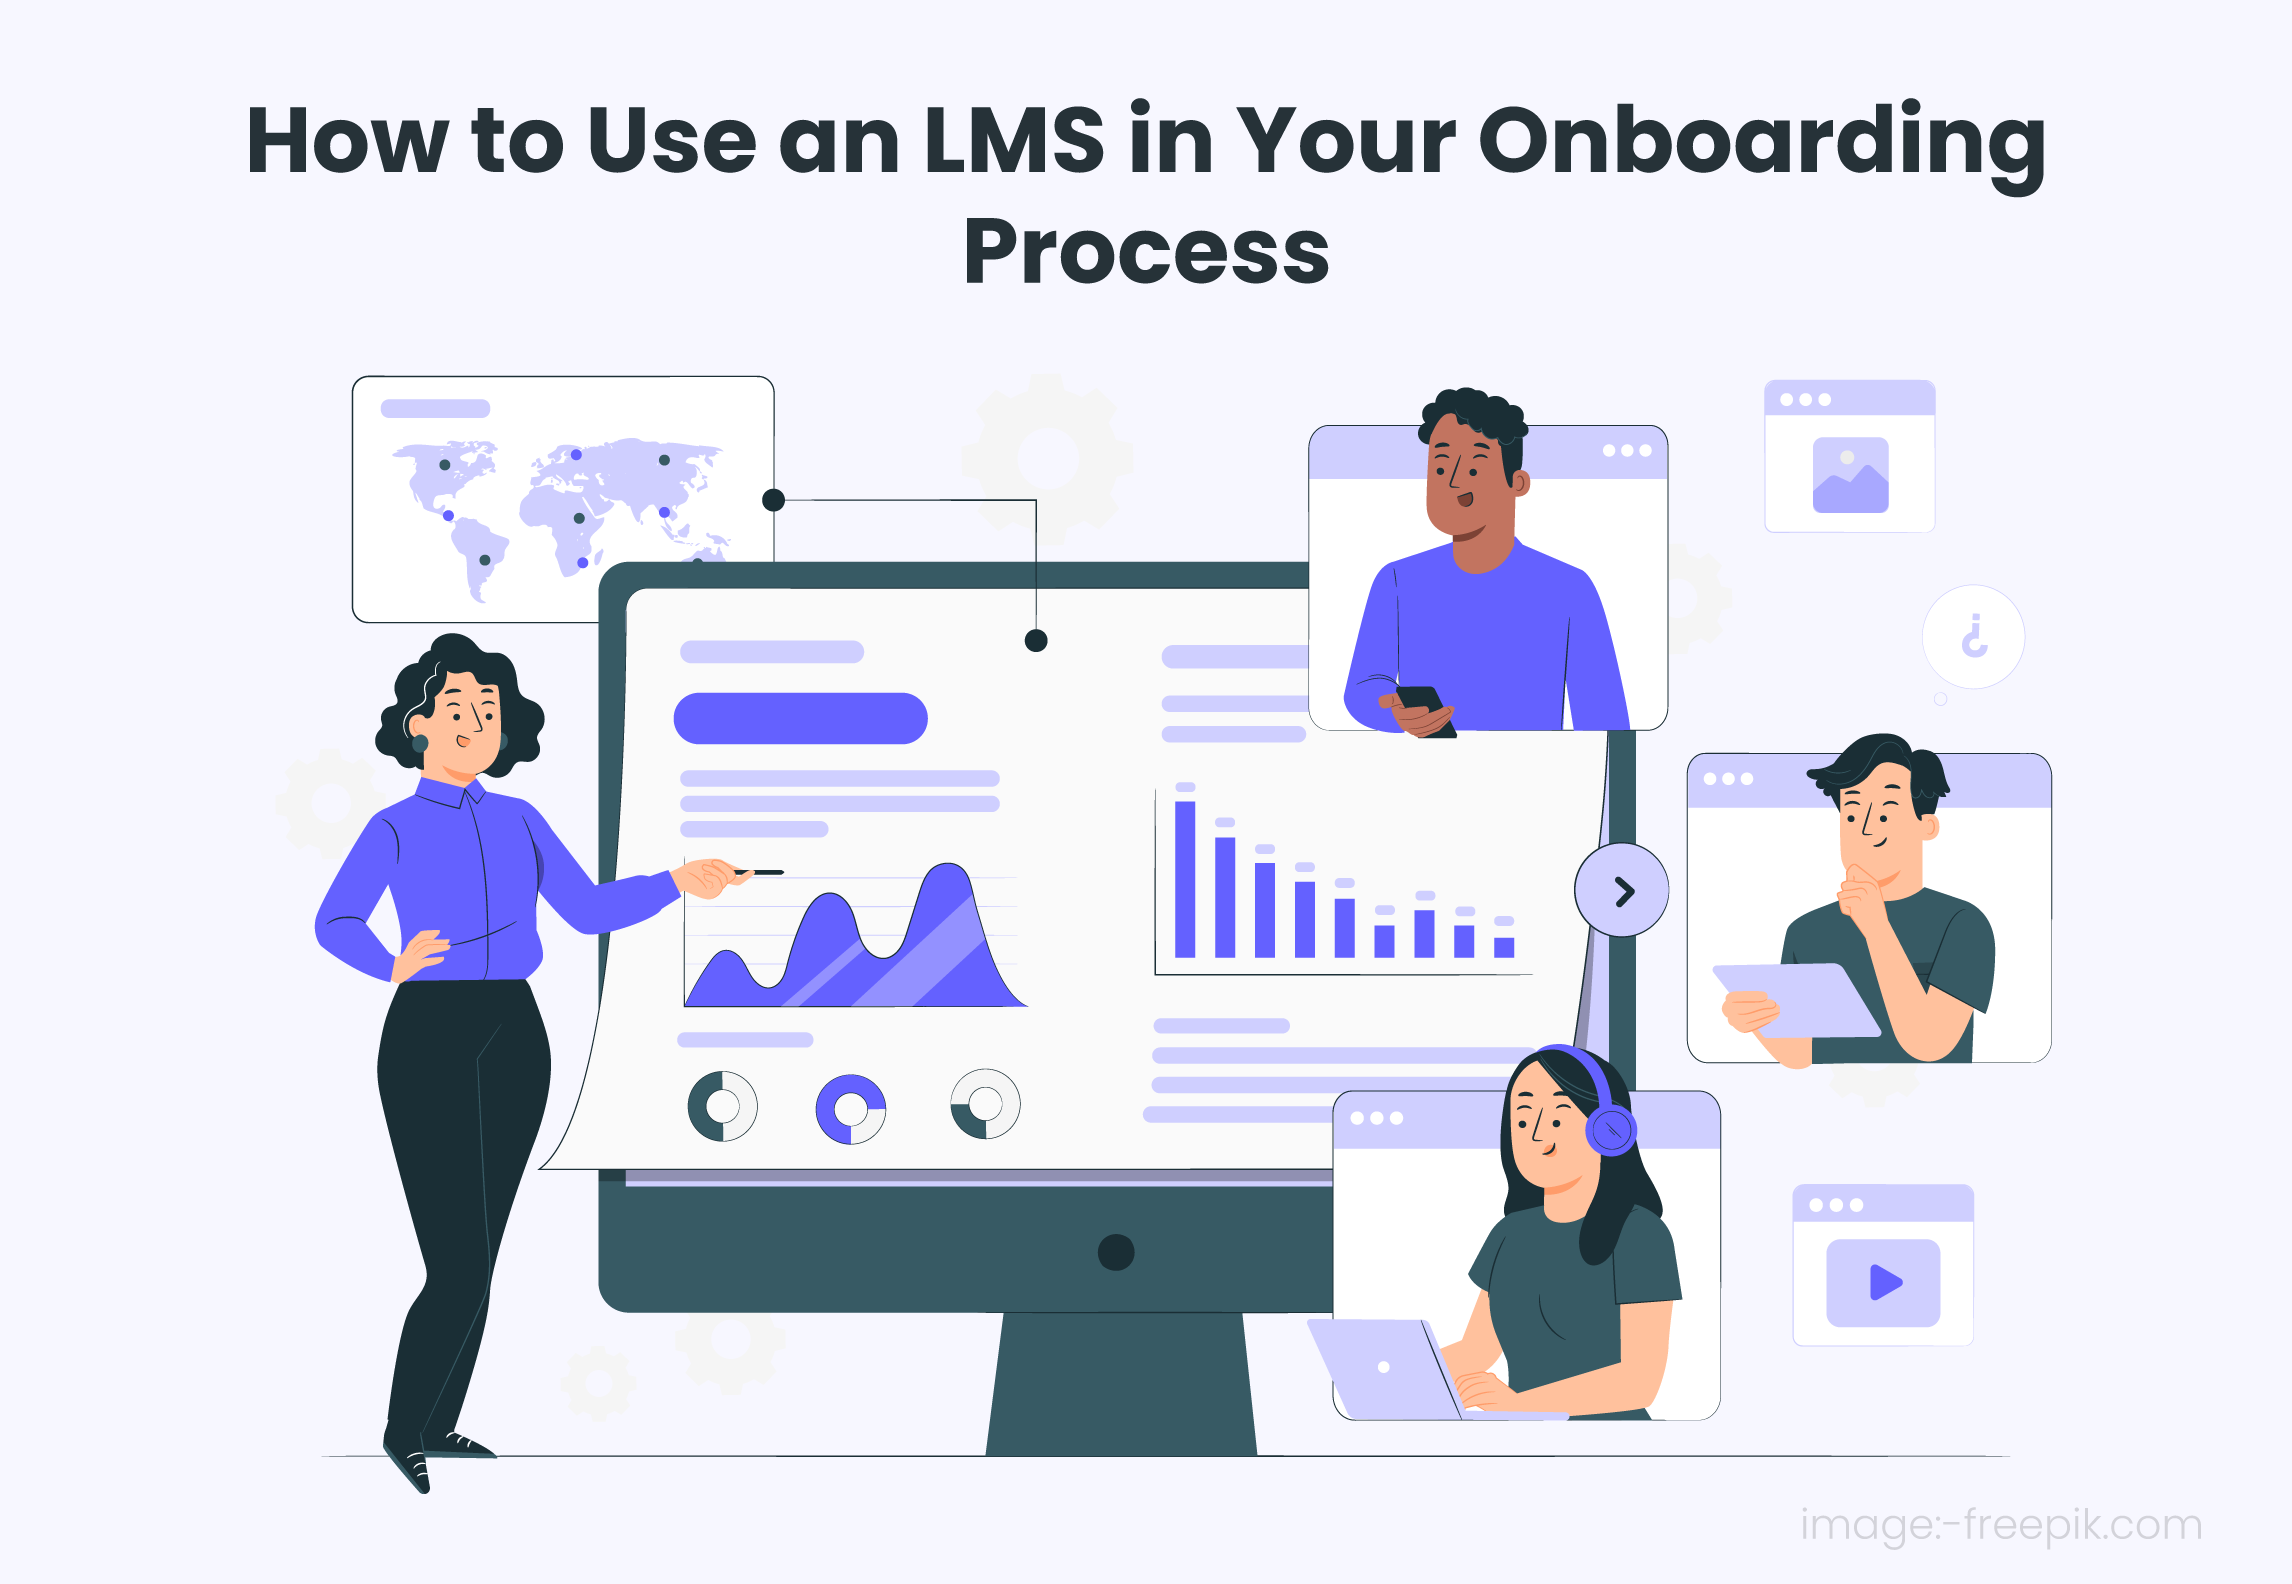 How to Use an LMS in Your Onboarding Process